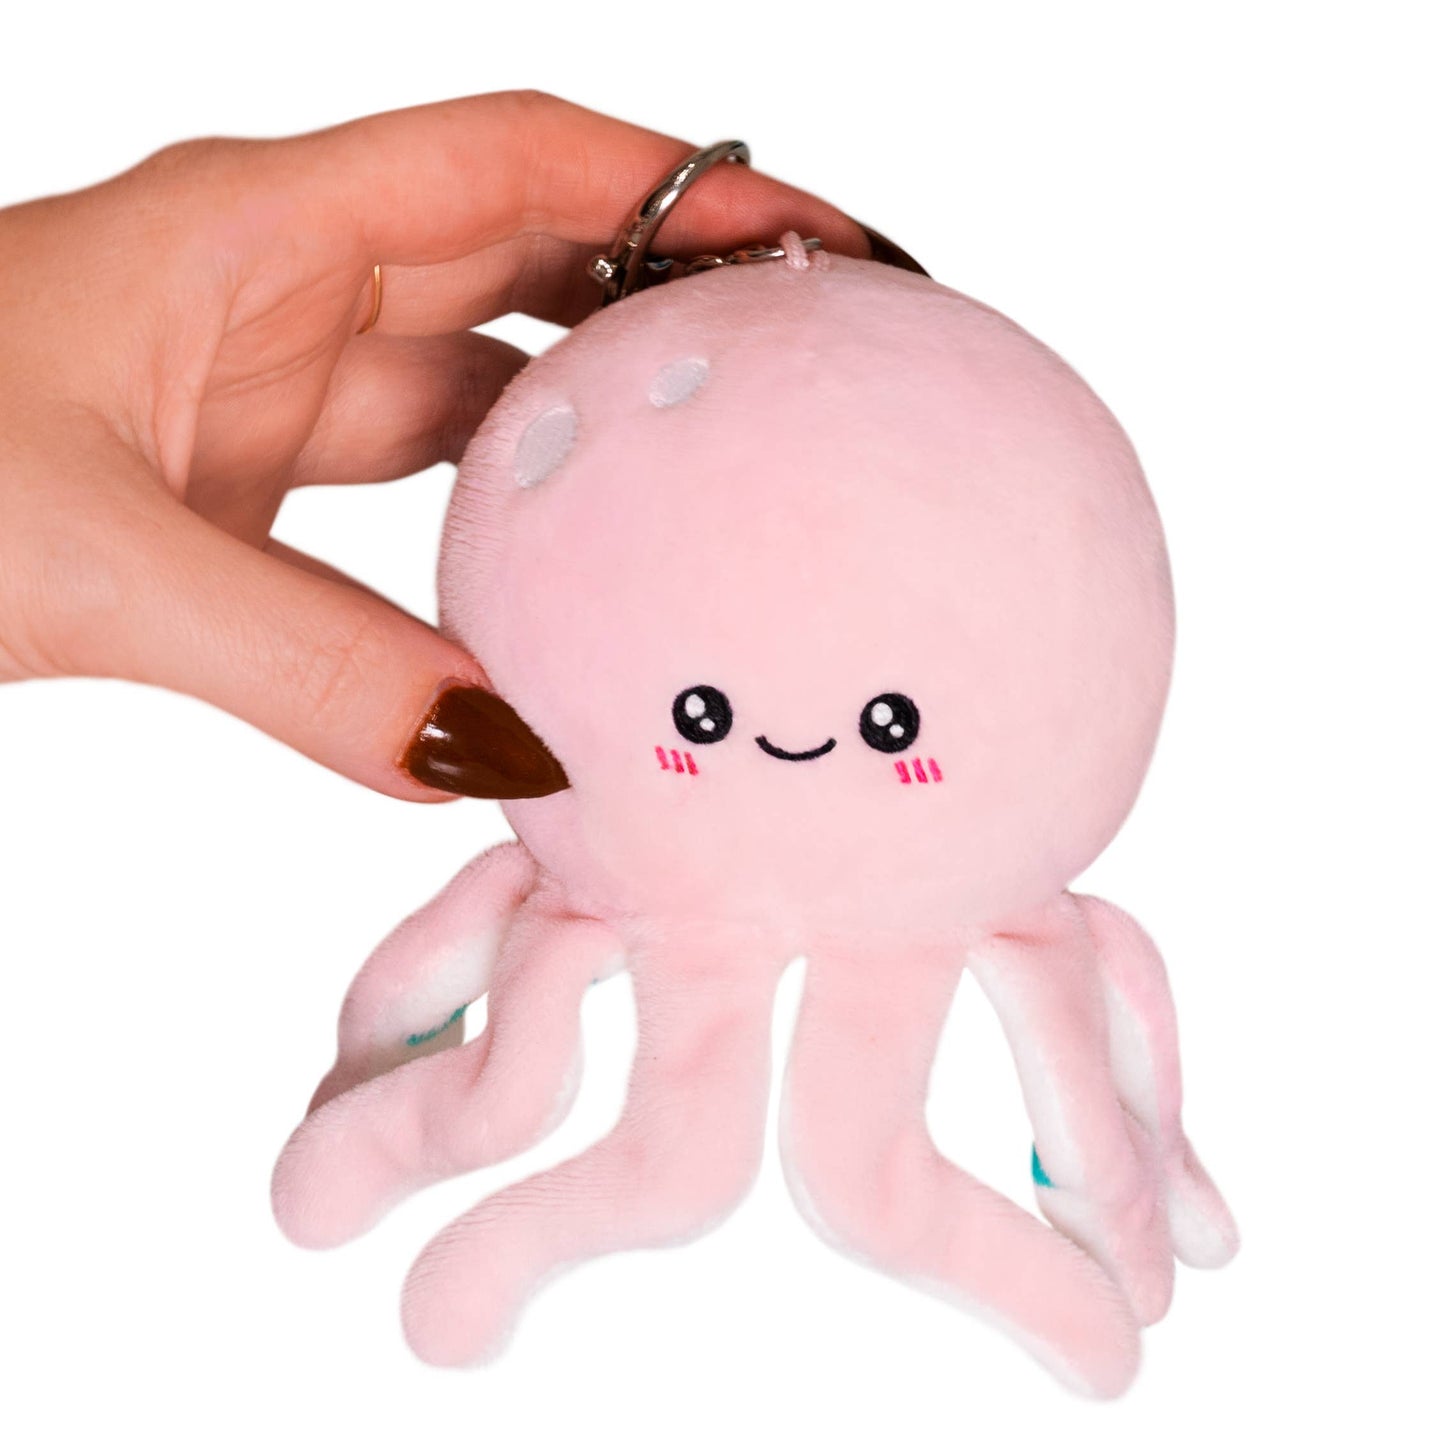 Micro Squishable Cute Octopus; backpack clip, keychain